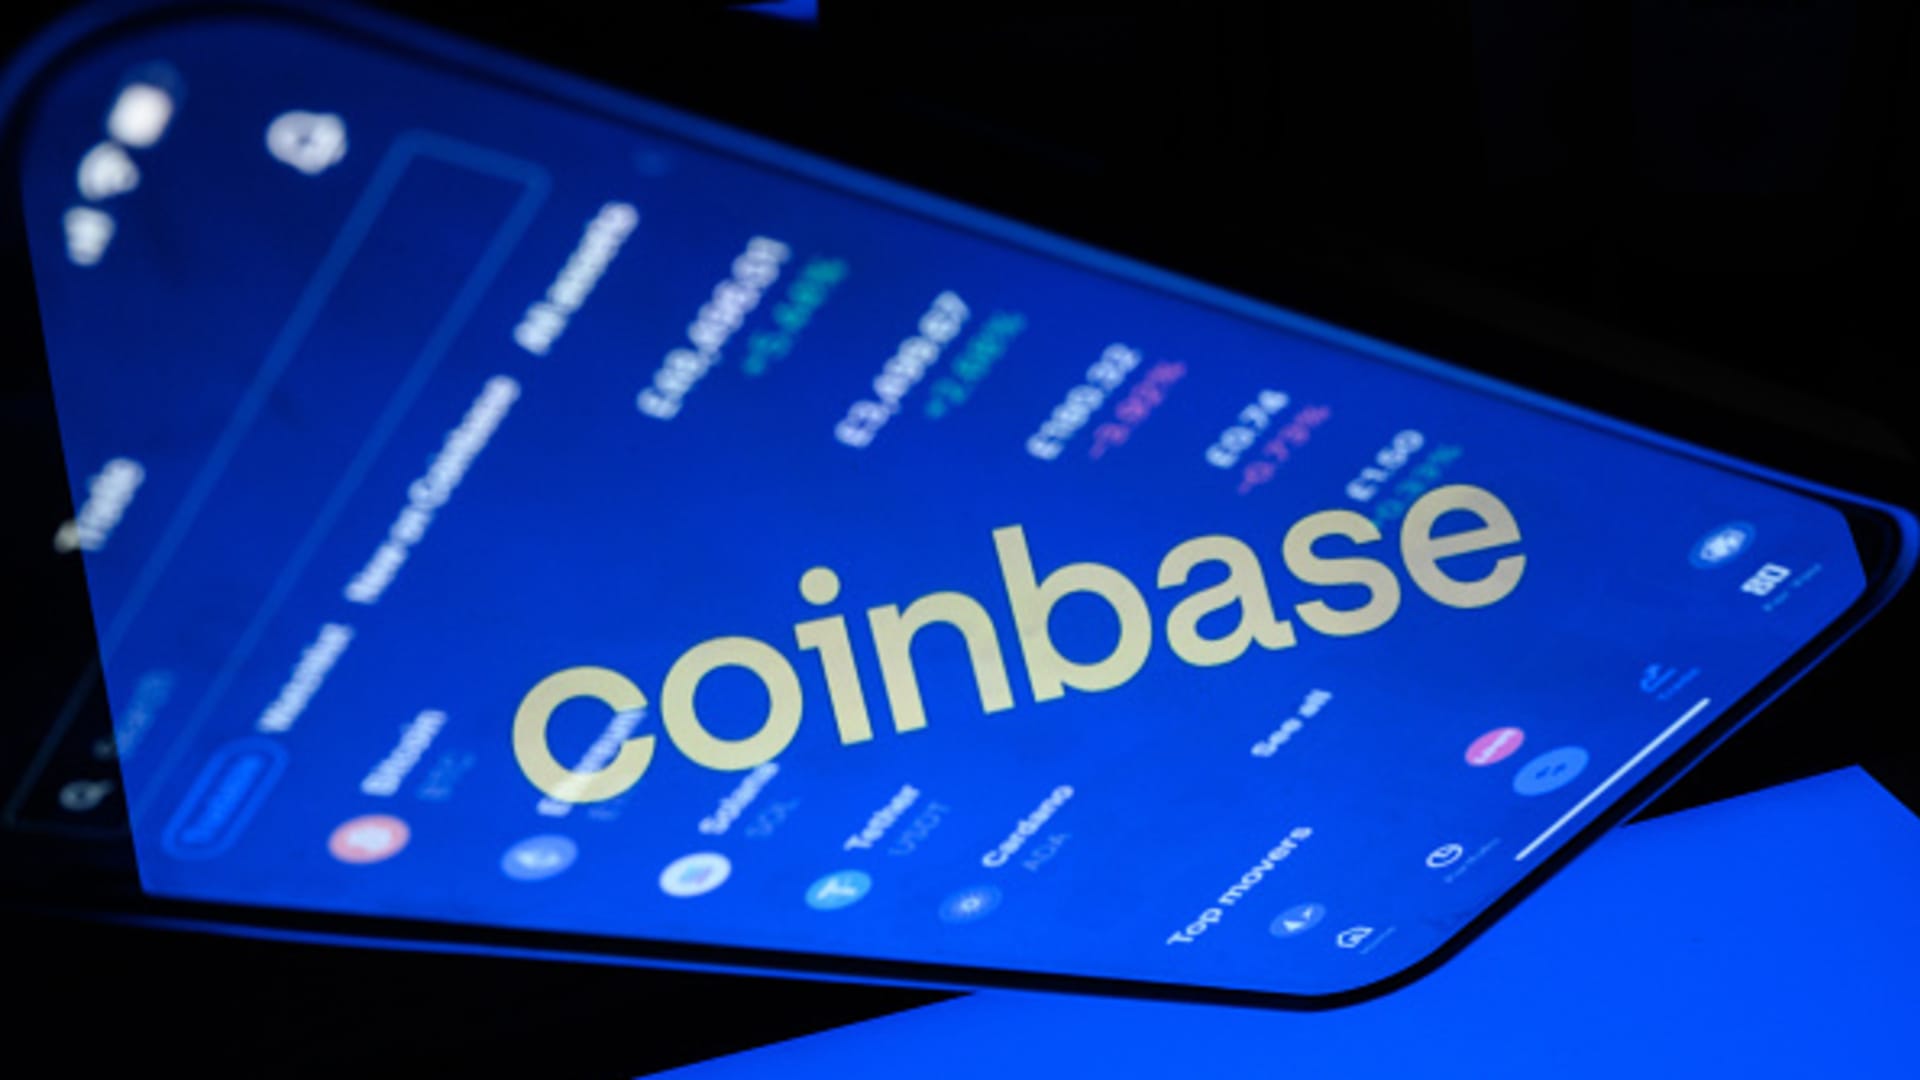 Coinbase is planning a pivotal acquisition that will allow it to launch crypto derivatives in the EU